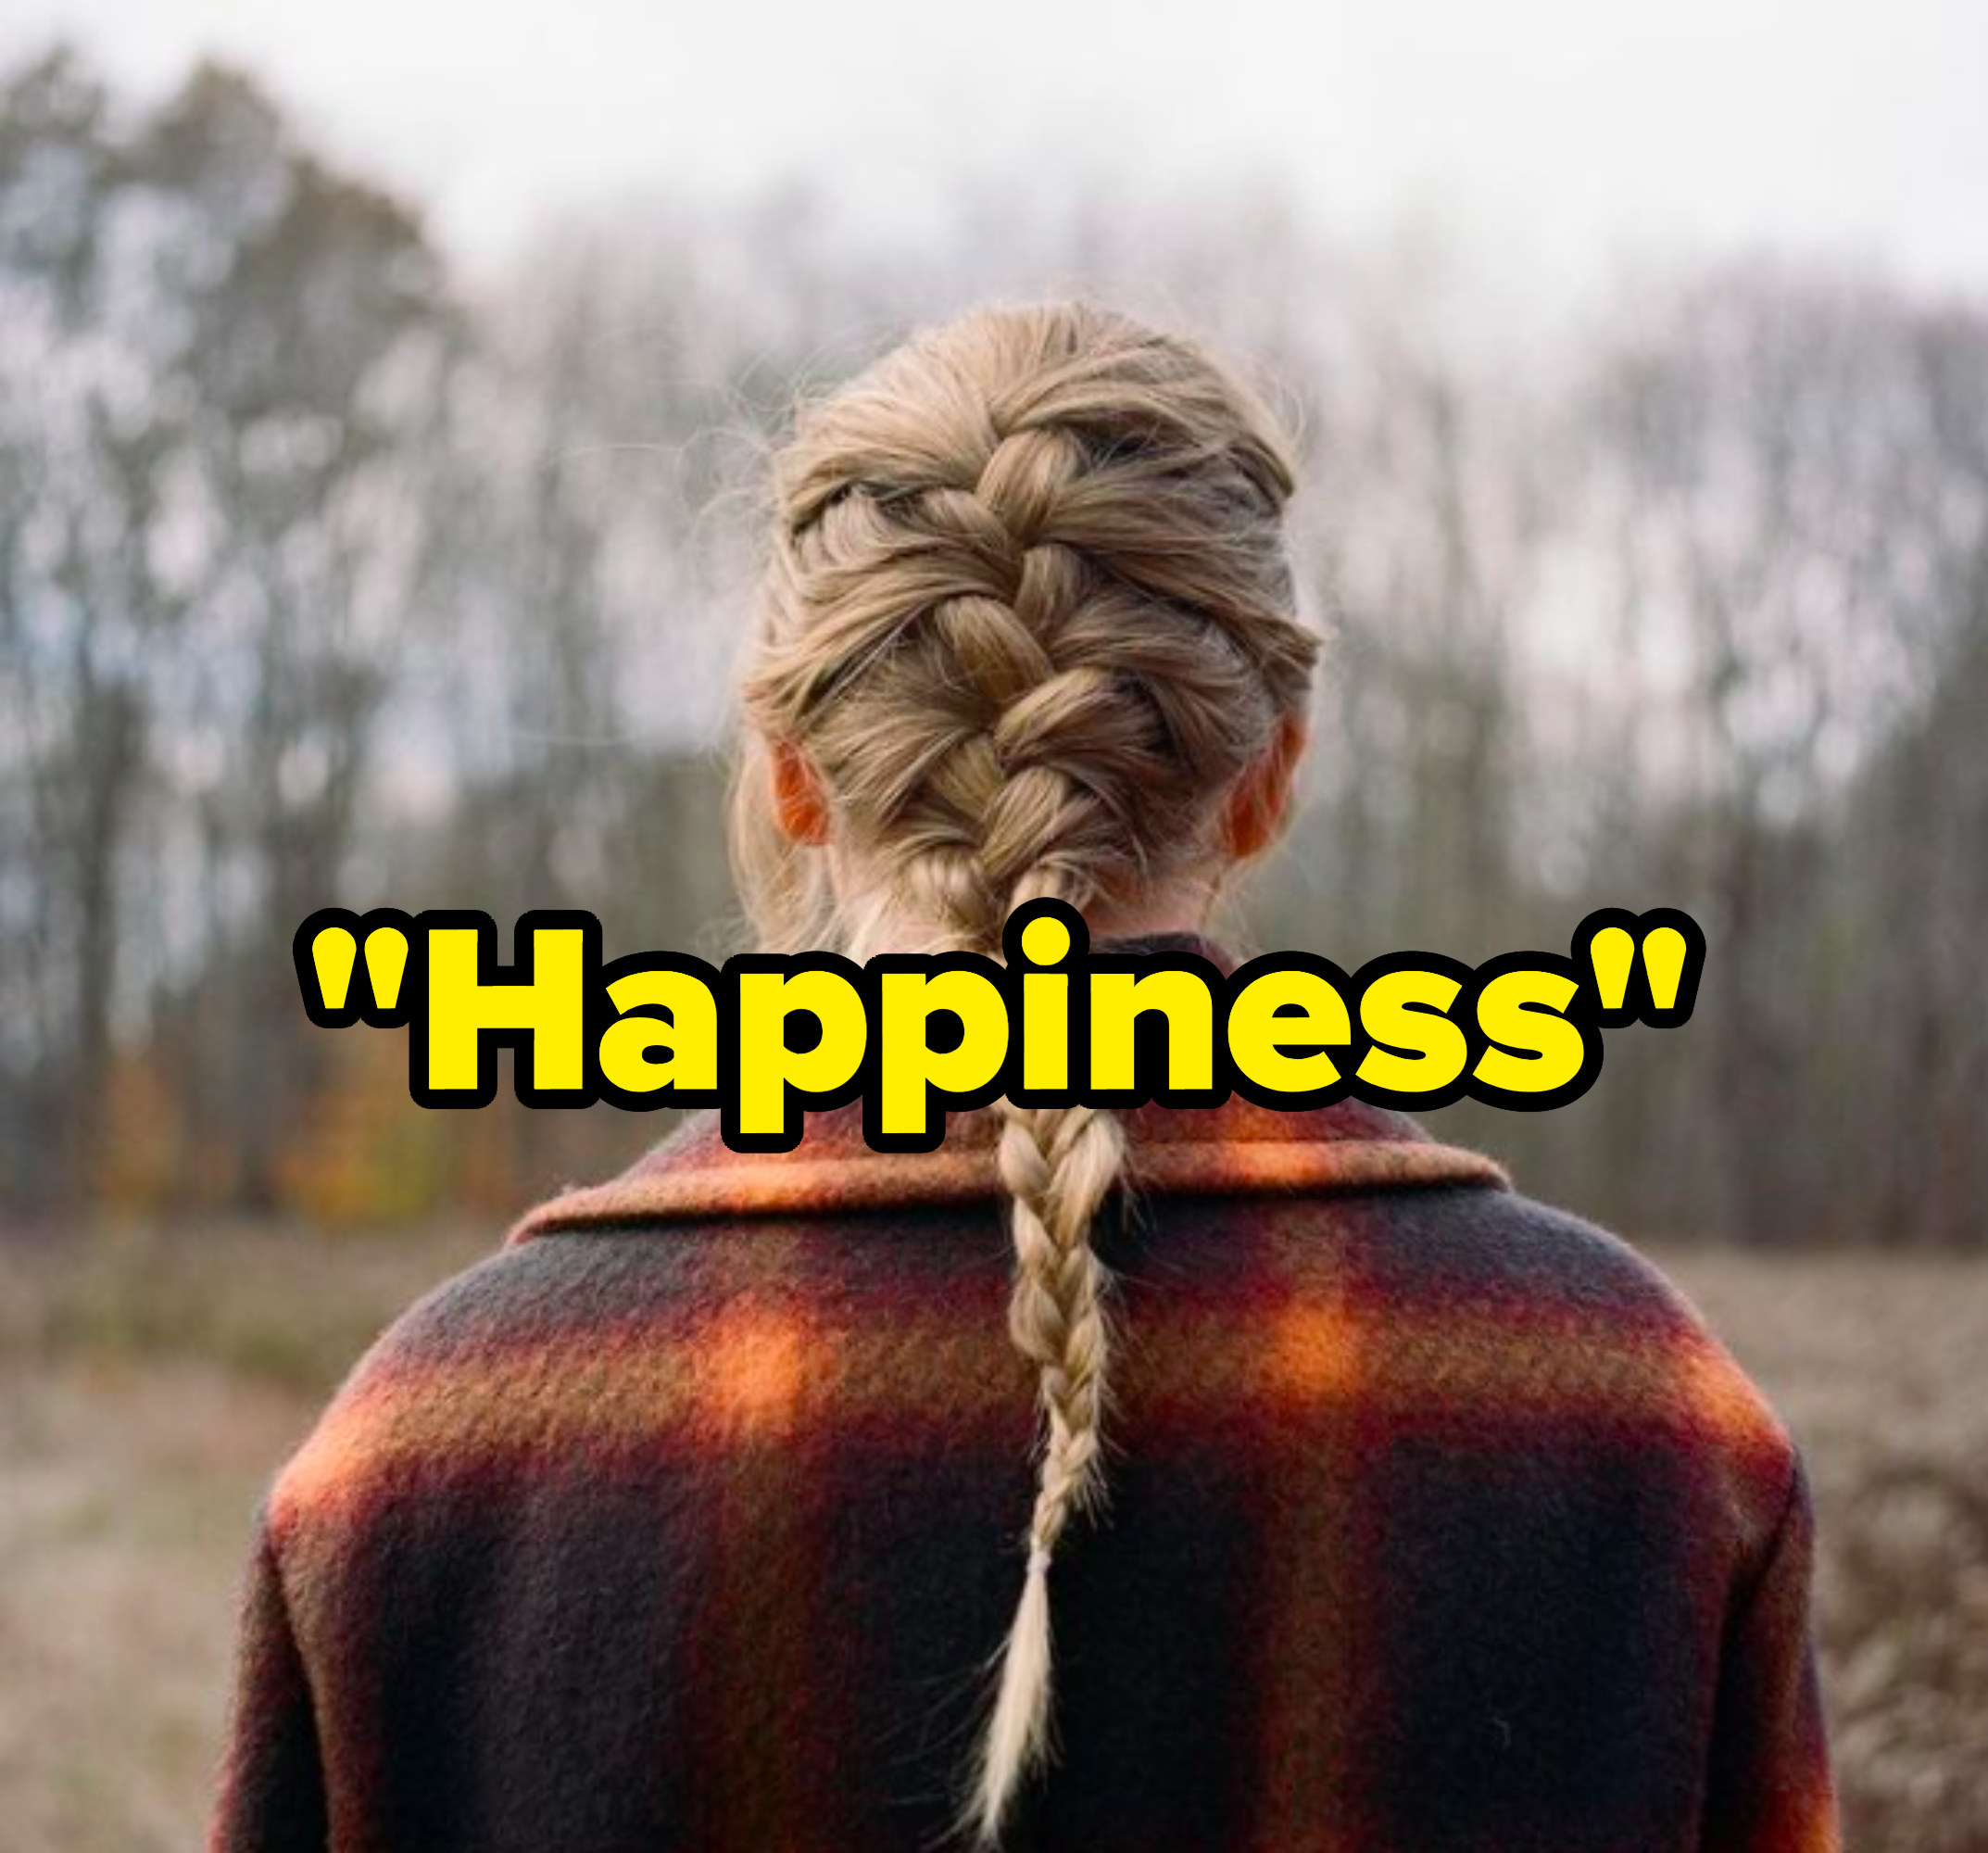 &quot;Happiness&quot; written over the &quot;Evermore&quot; album cover